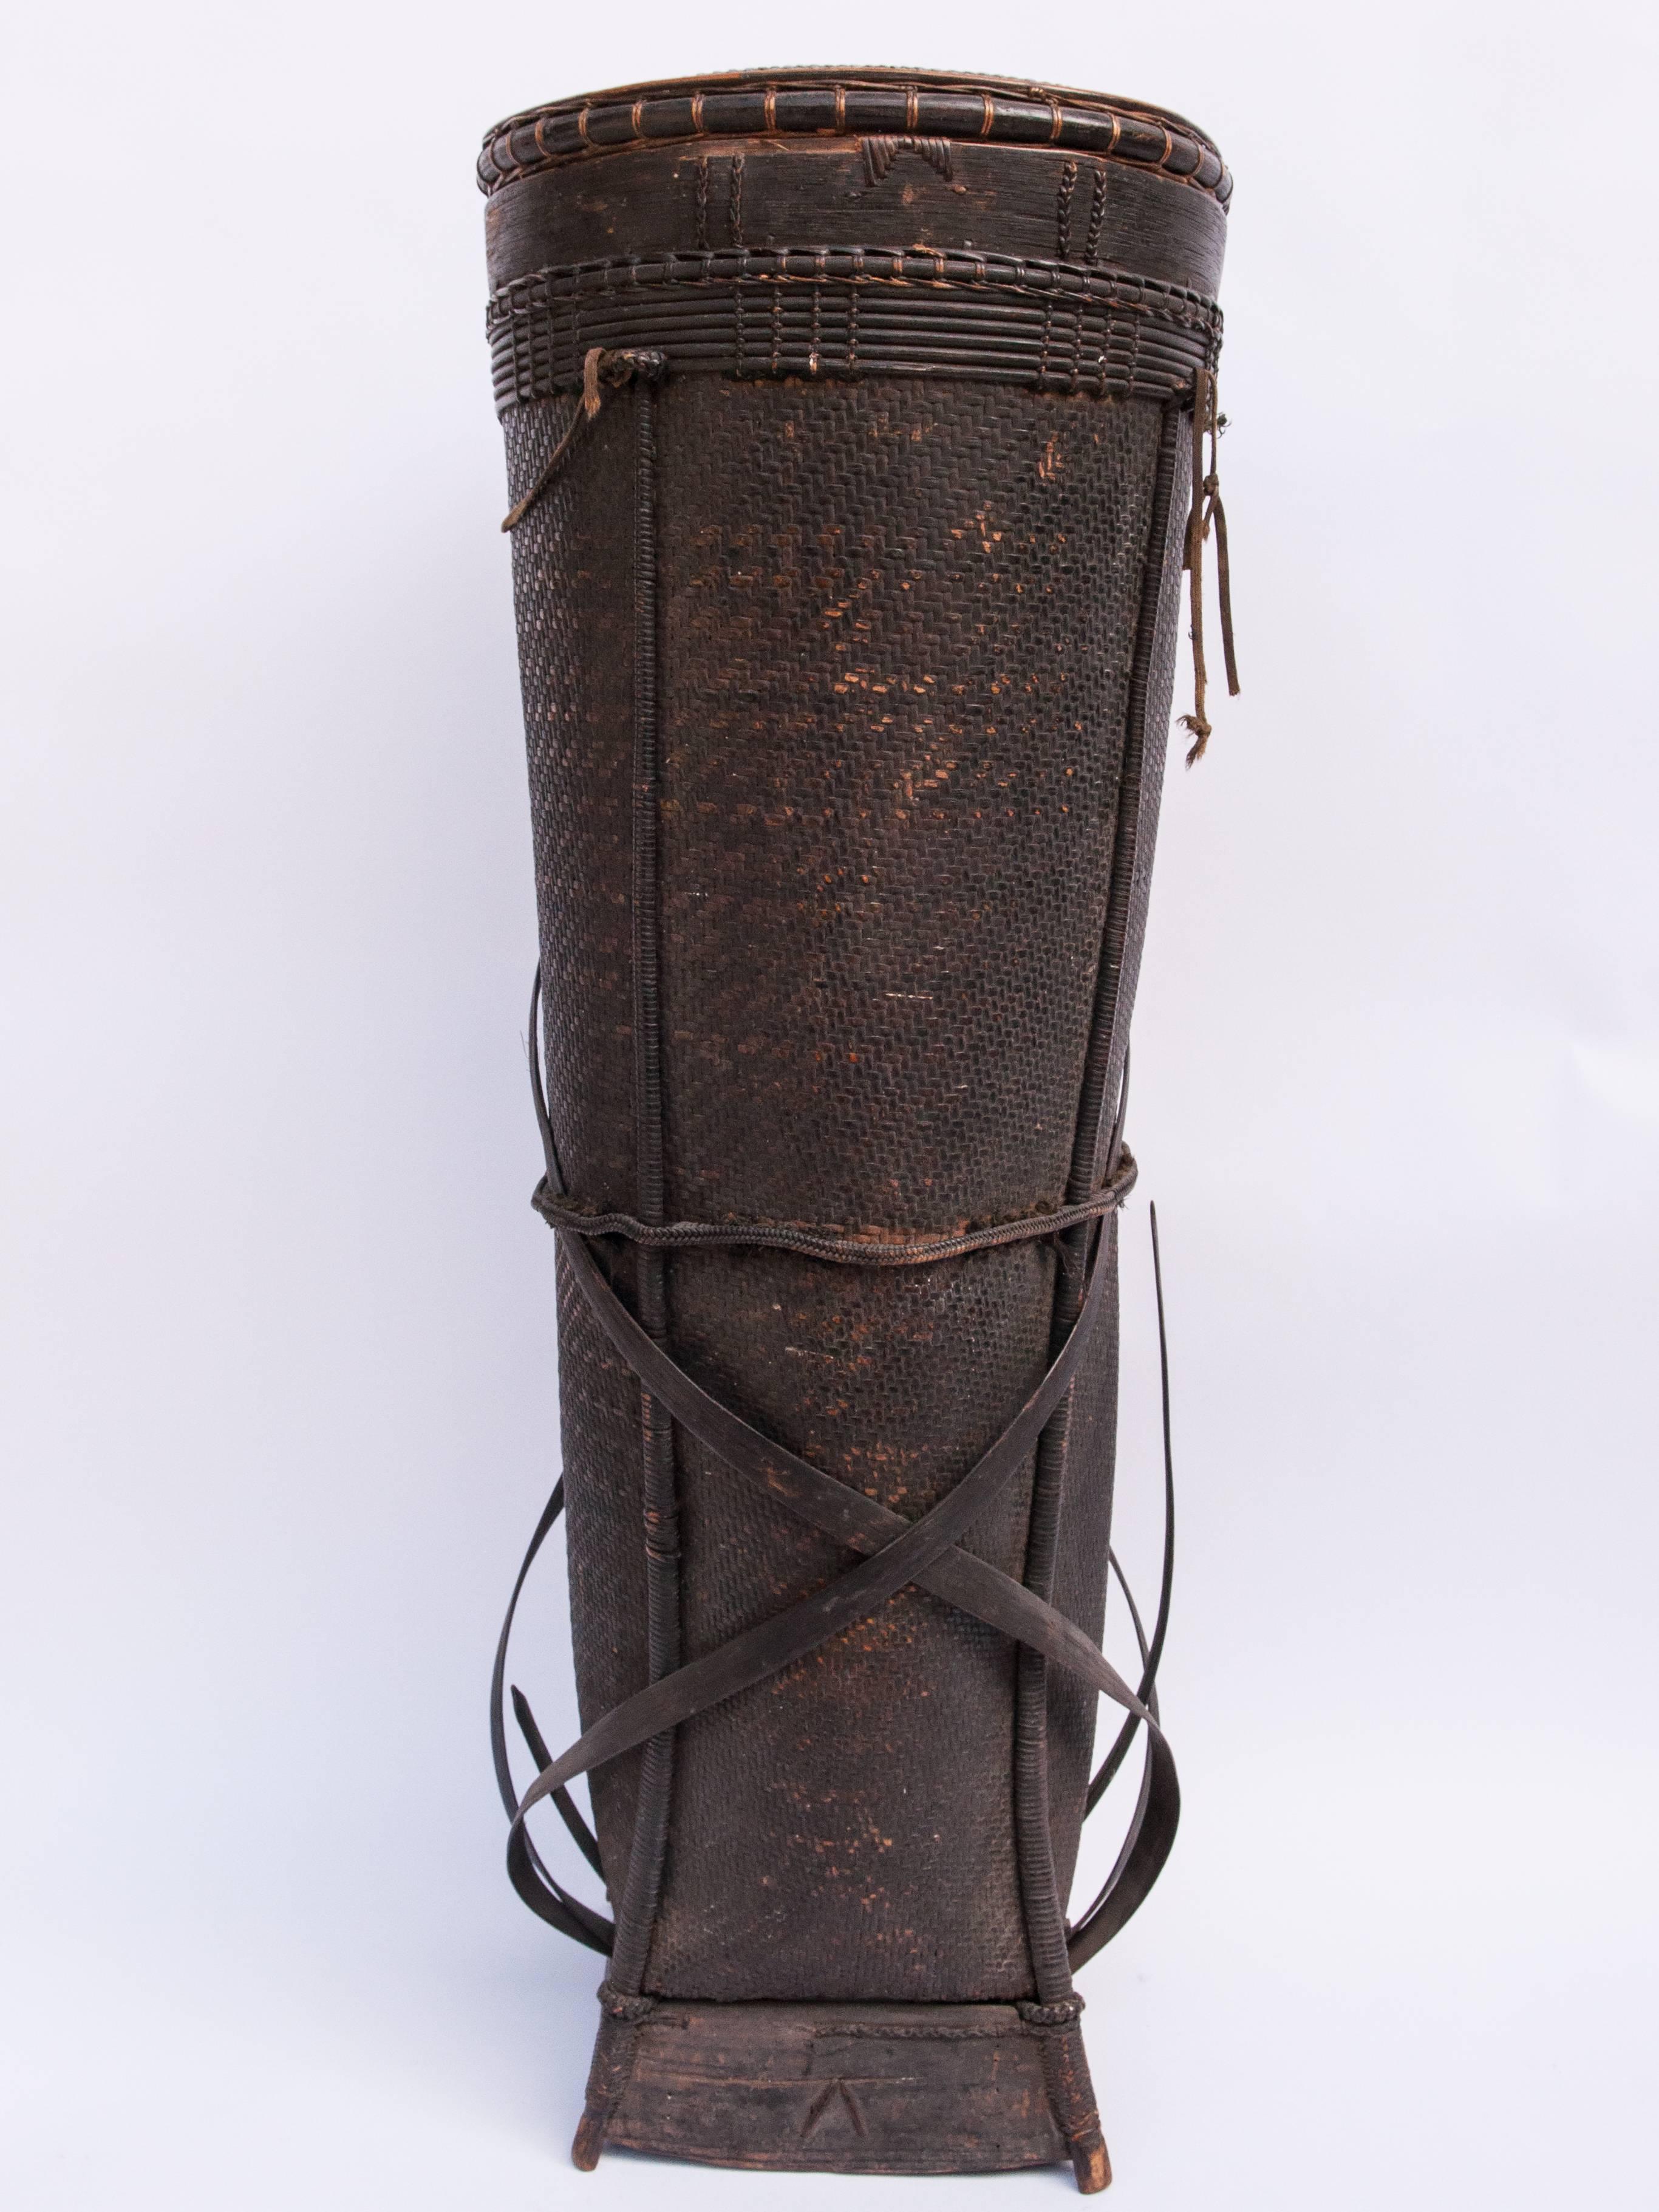 Laotian Tall Tribal Storage Basket with Lid from Laos, Mid-20th Century